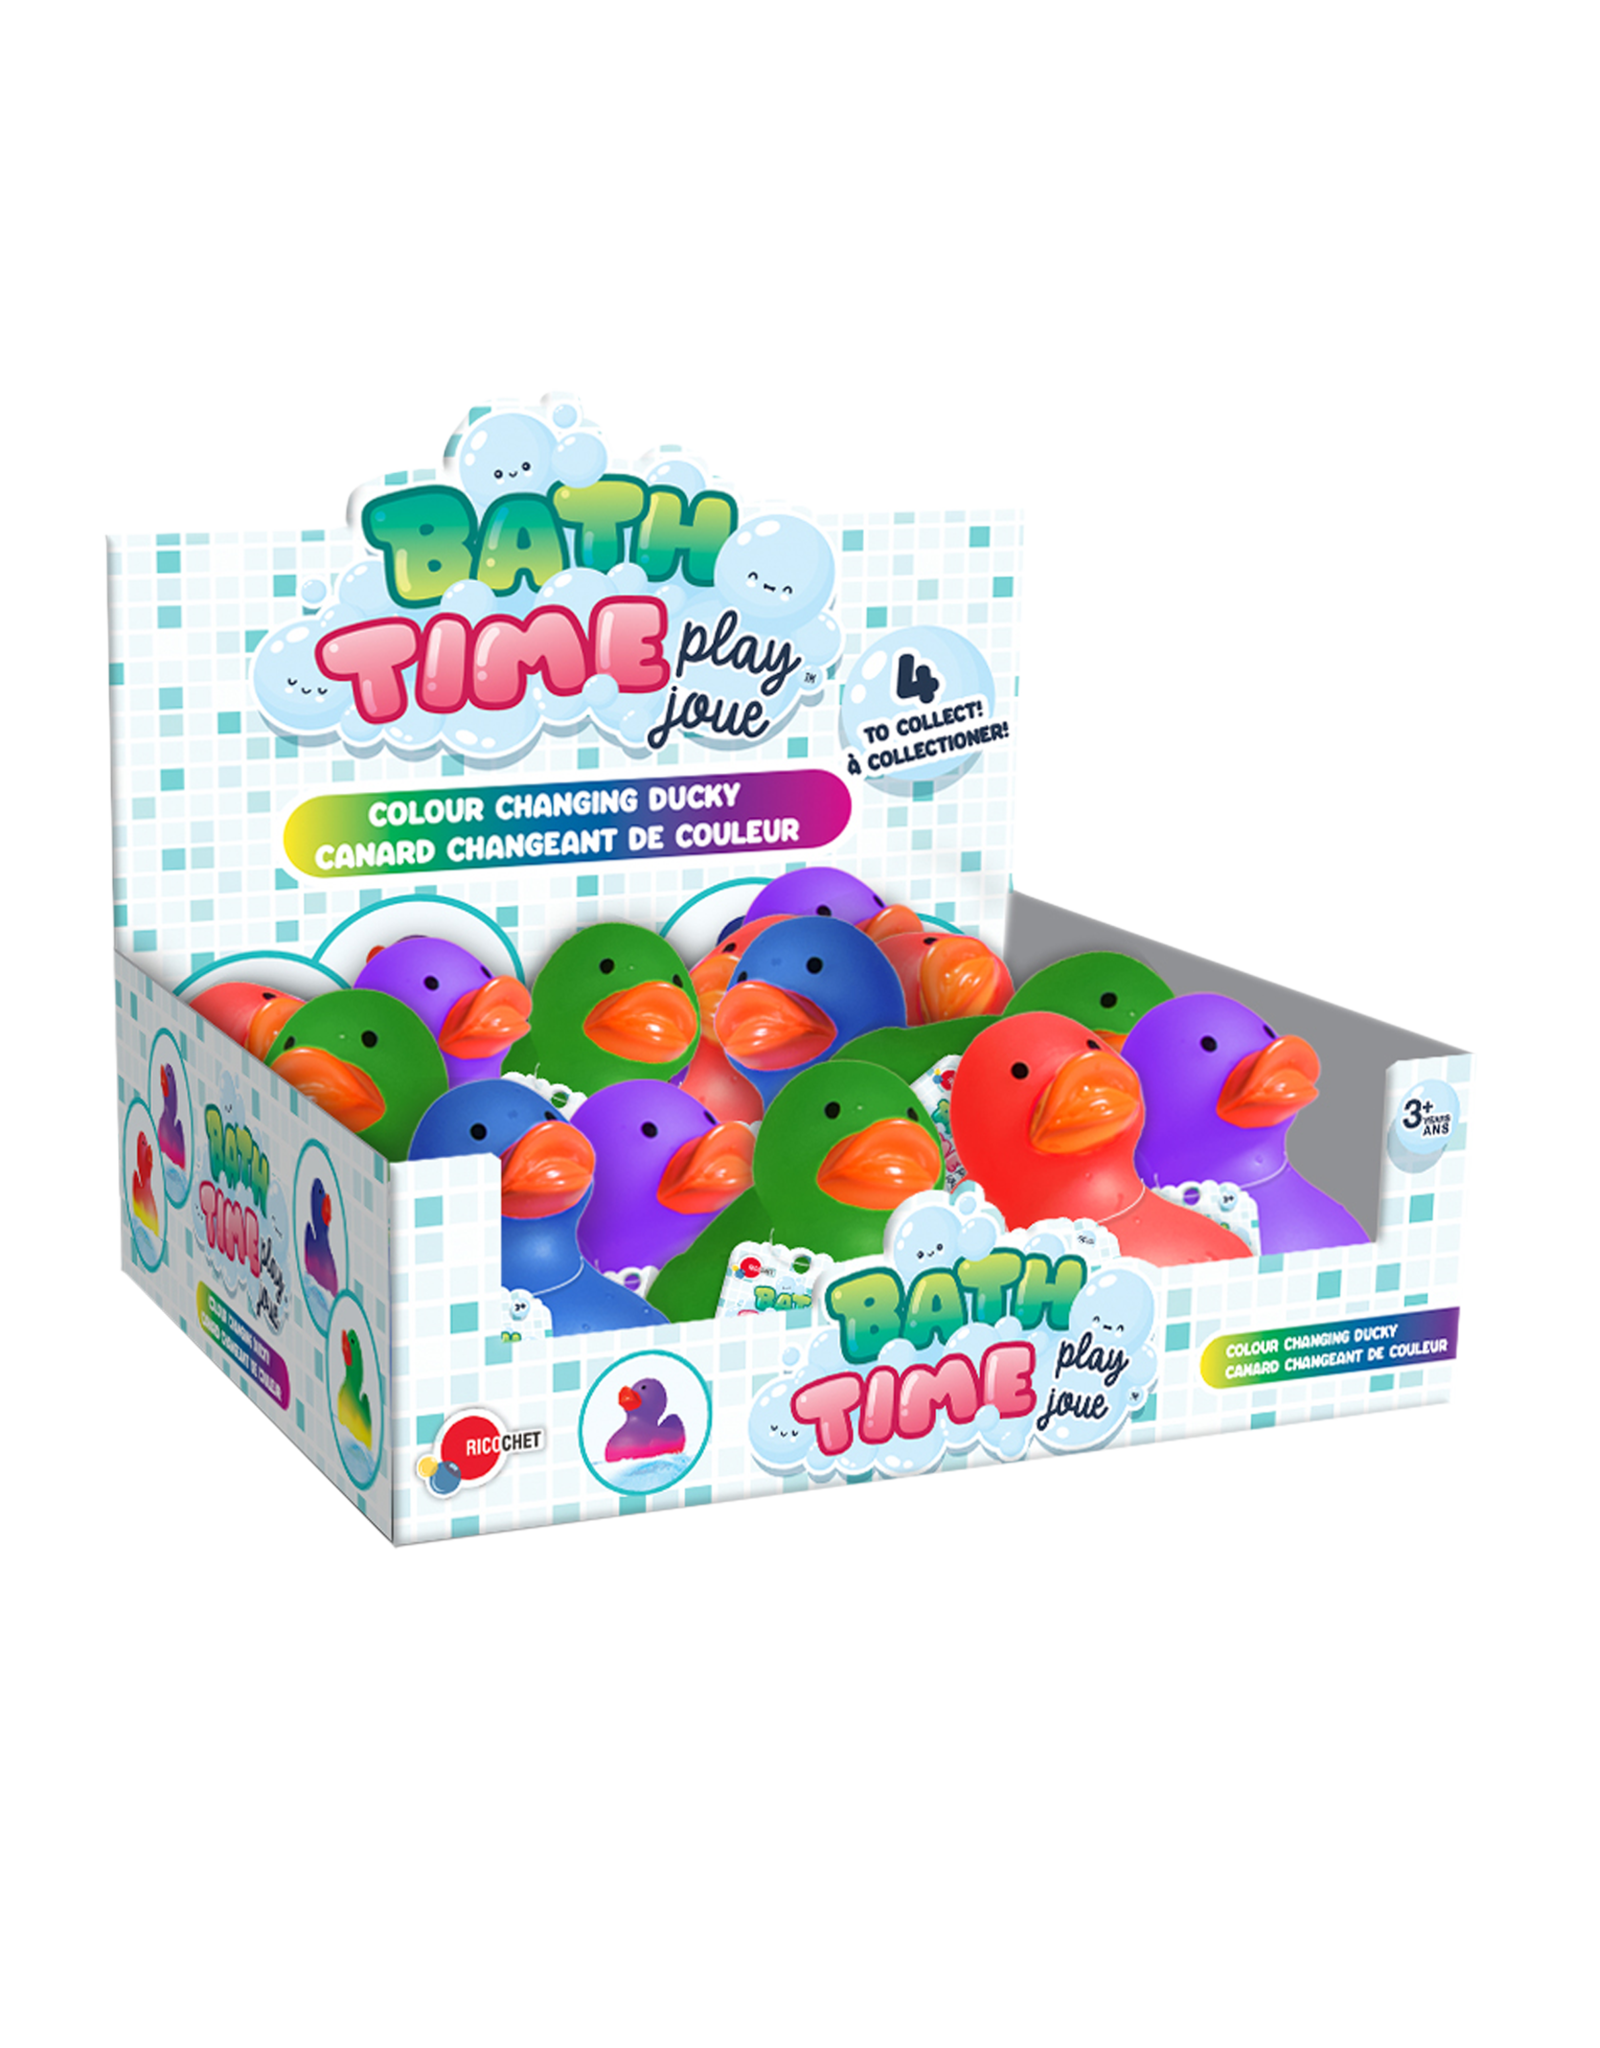 Ricochet Bath time play - Color changing ducky